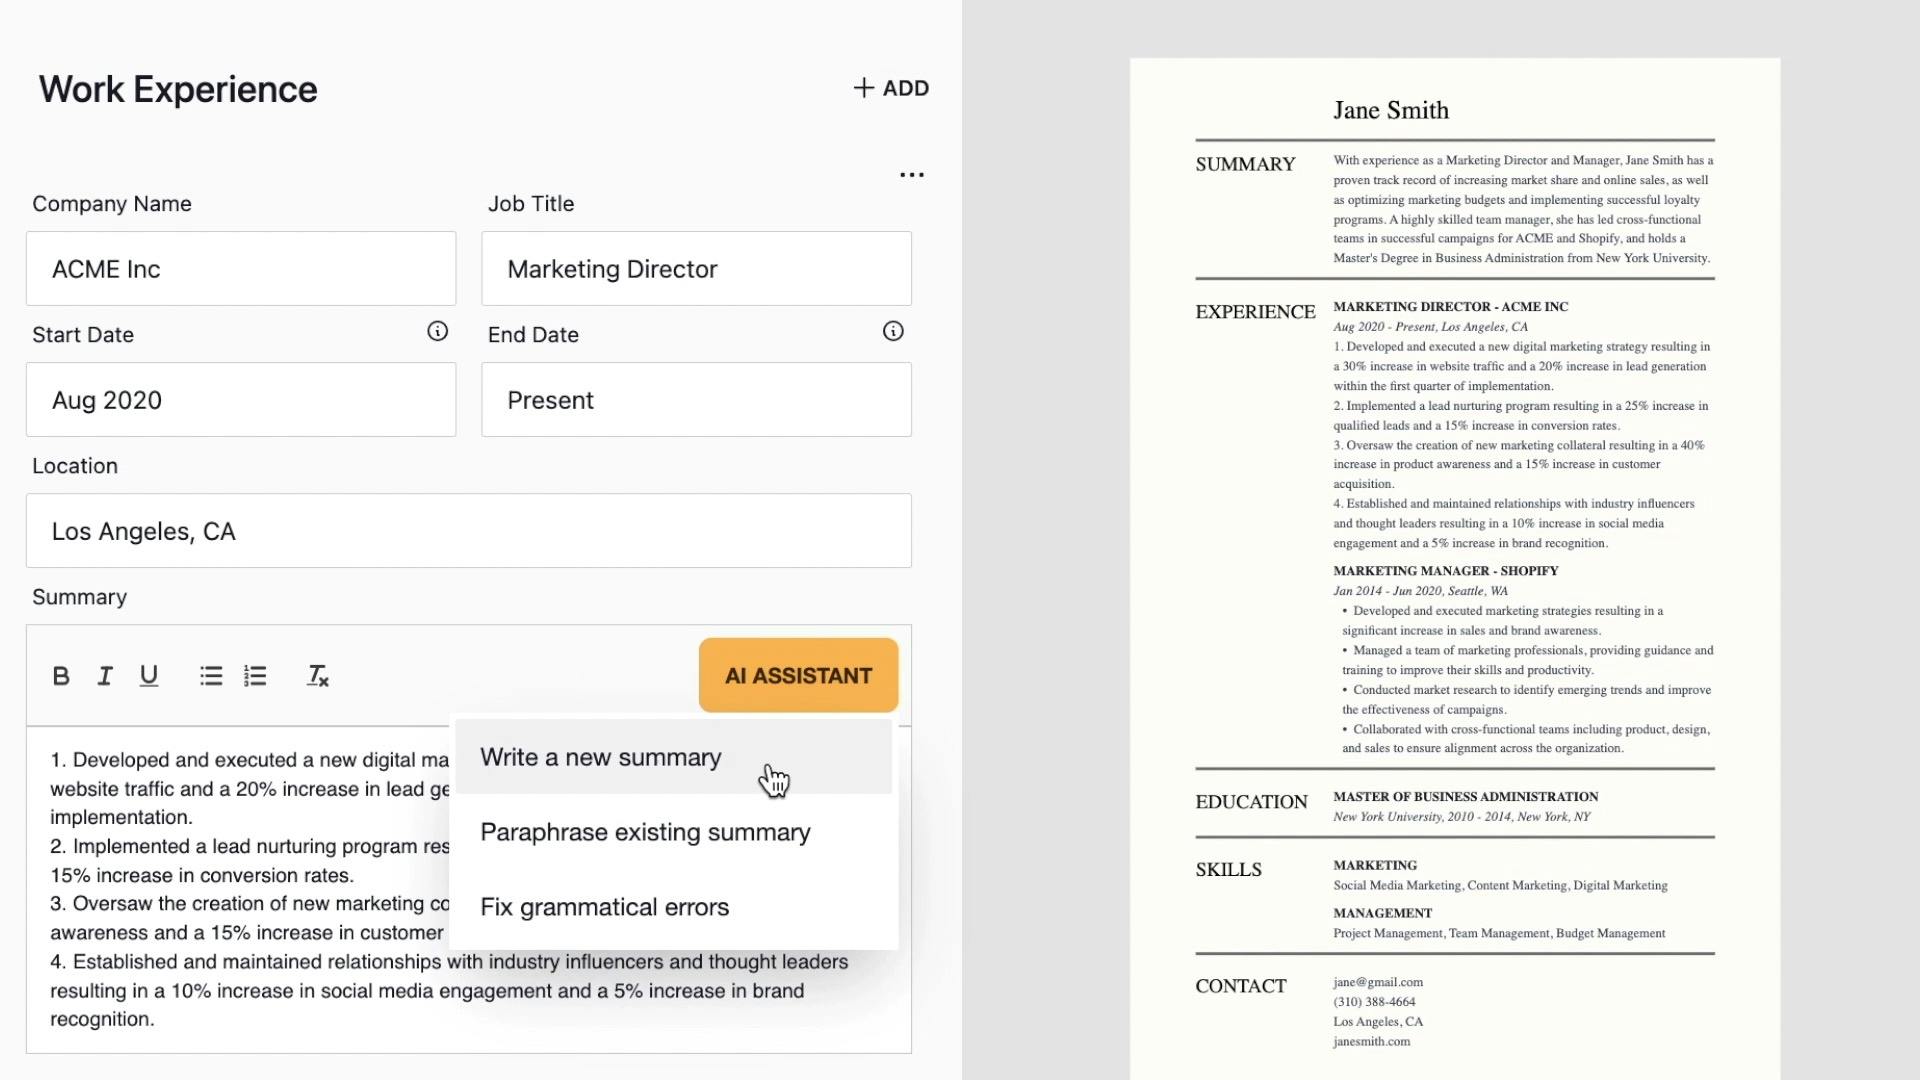 AI Assistant helps with your resume